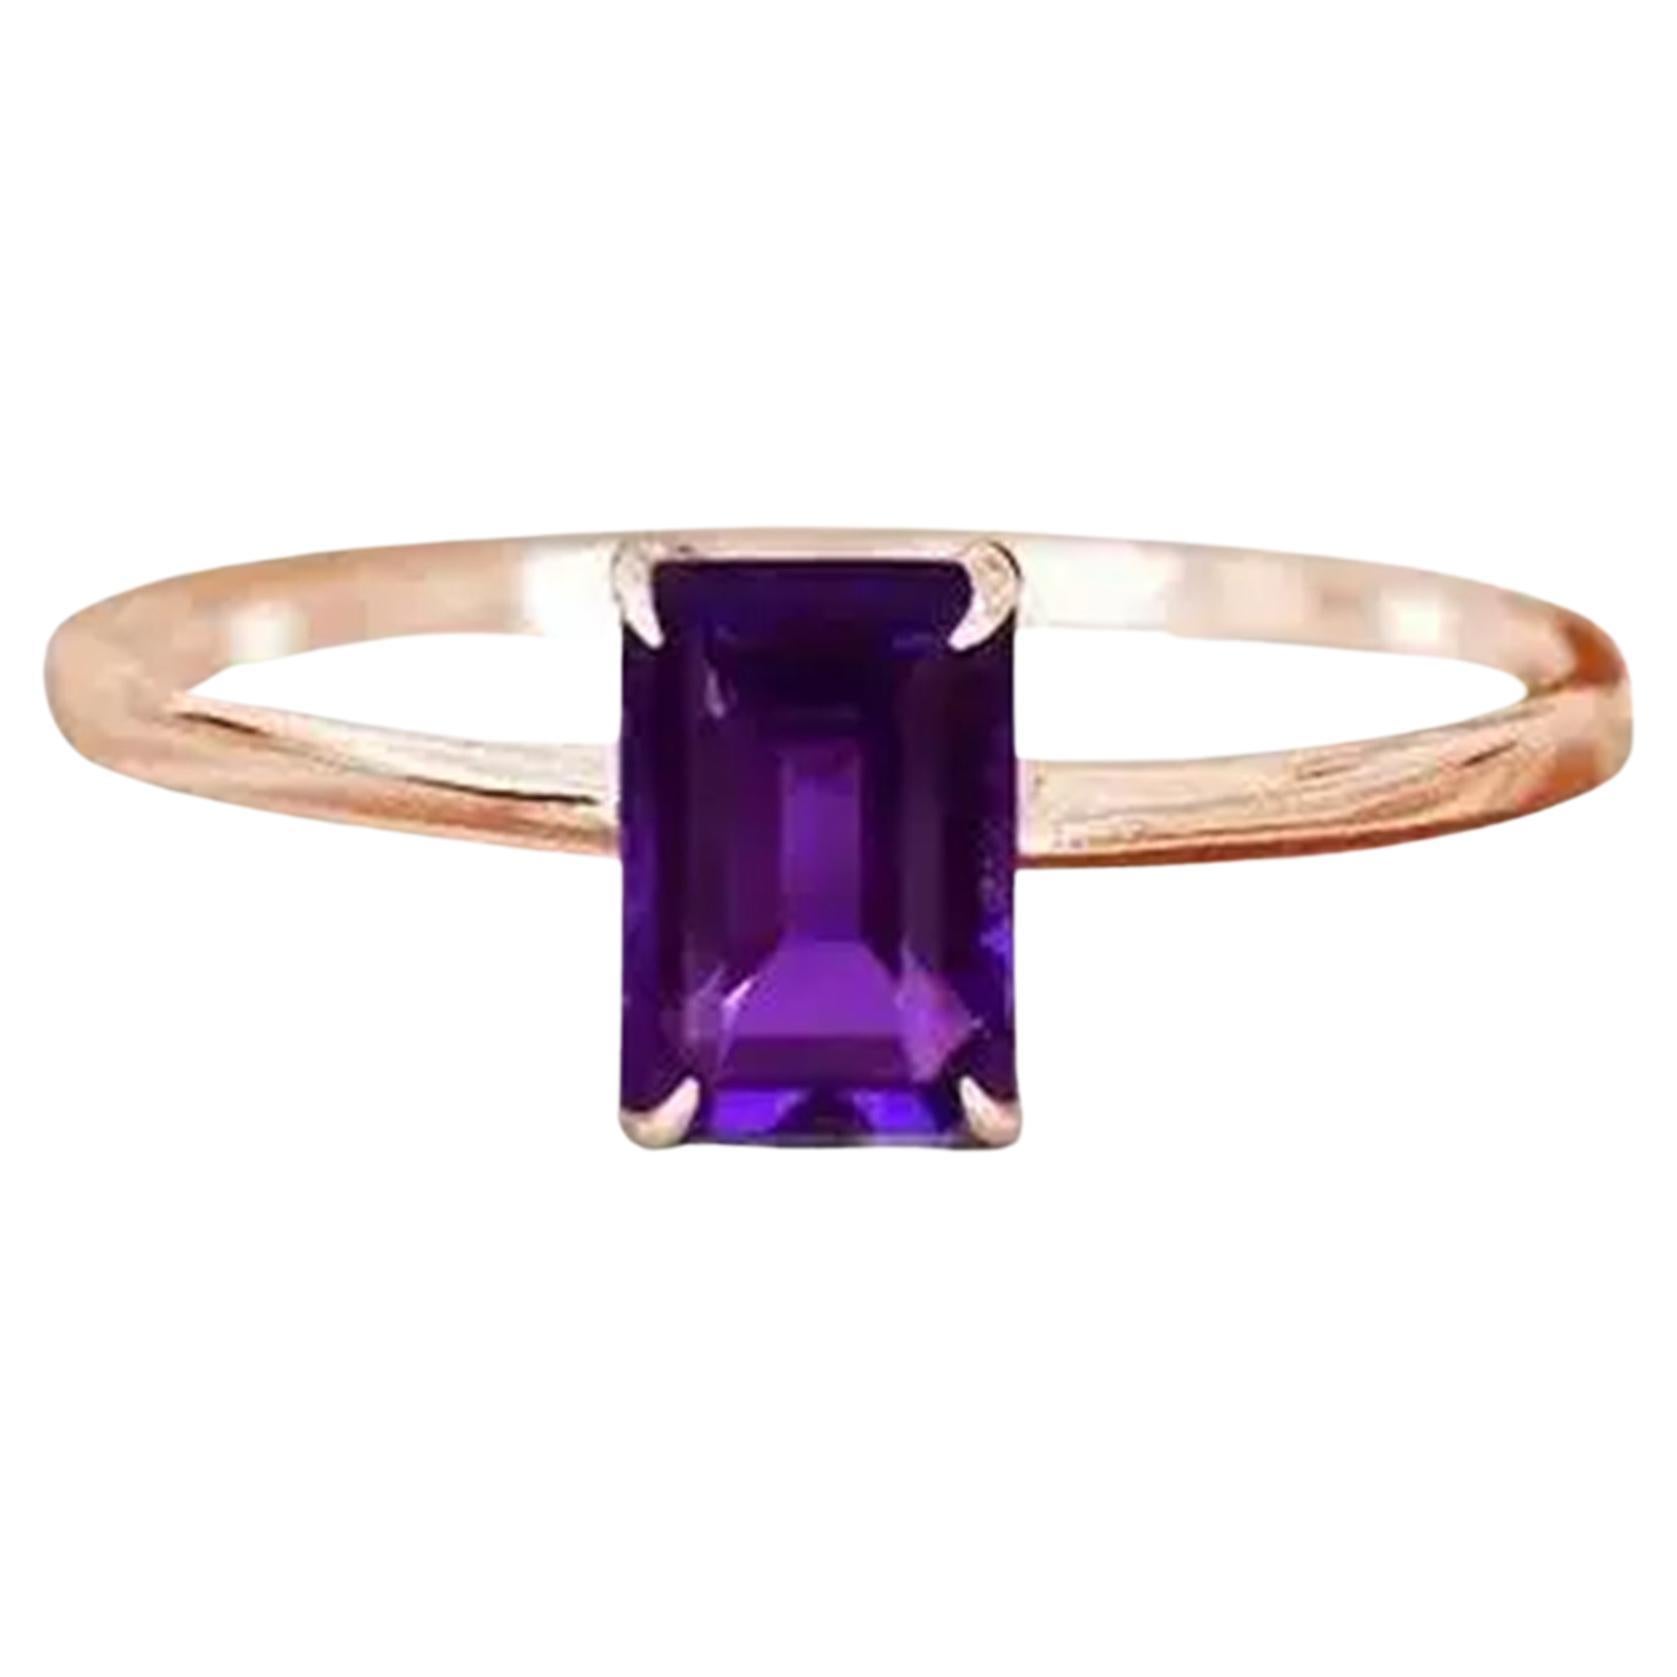 For Sale:  14k Gold Octagon 7x5 mm Octagon Gemstone Ring Birthstone Ring Stackable Ring